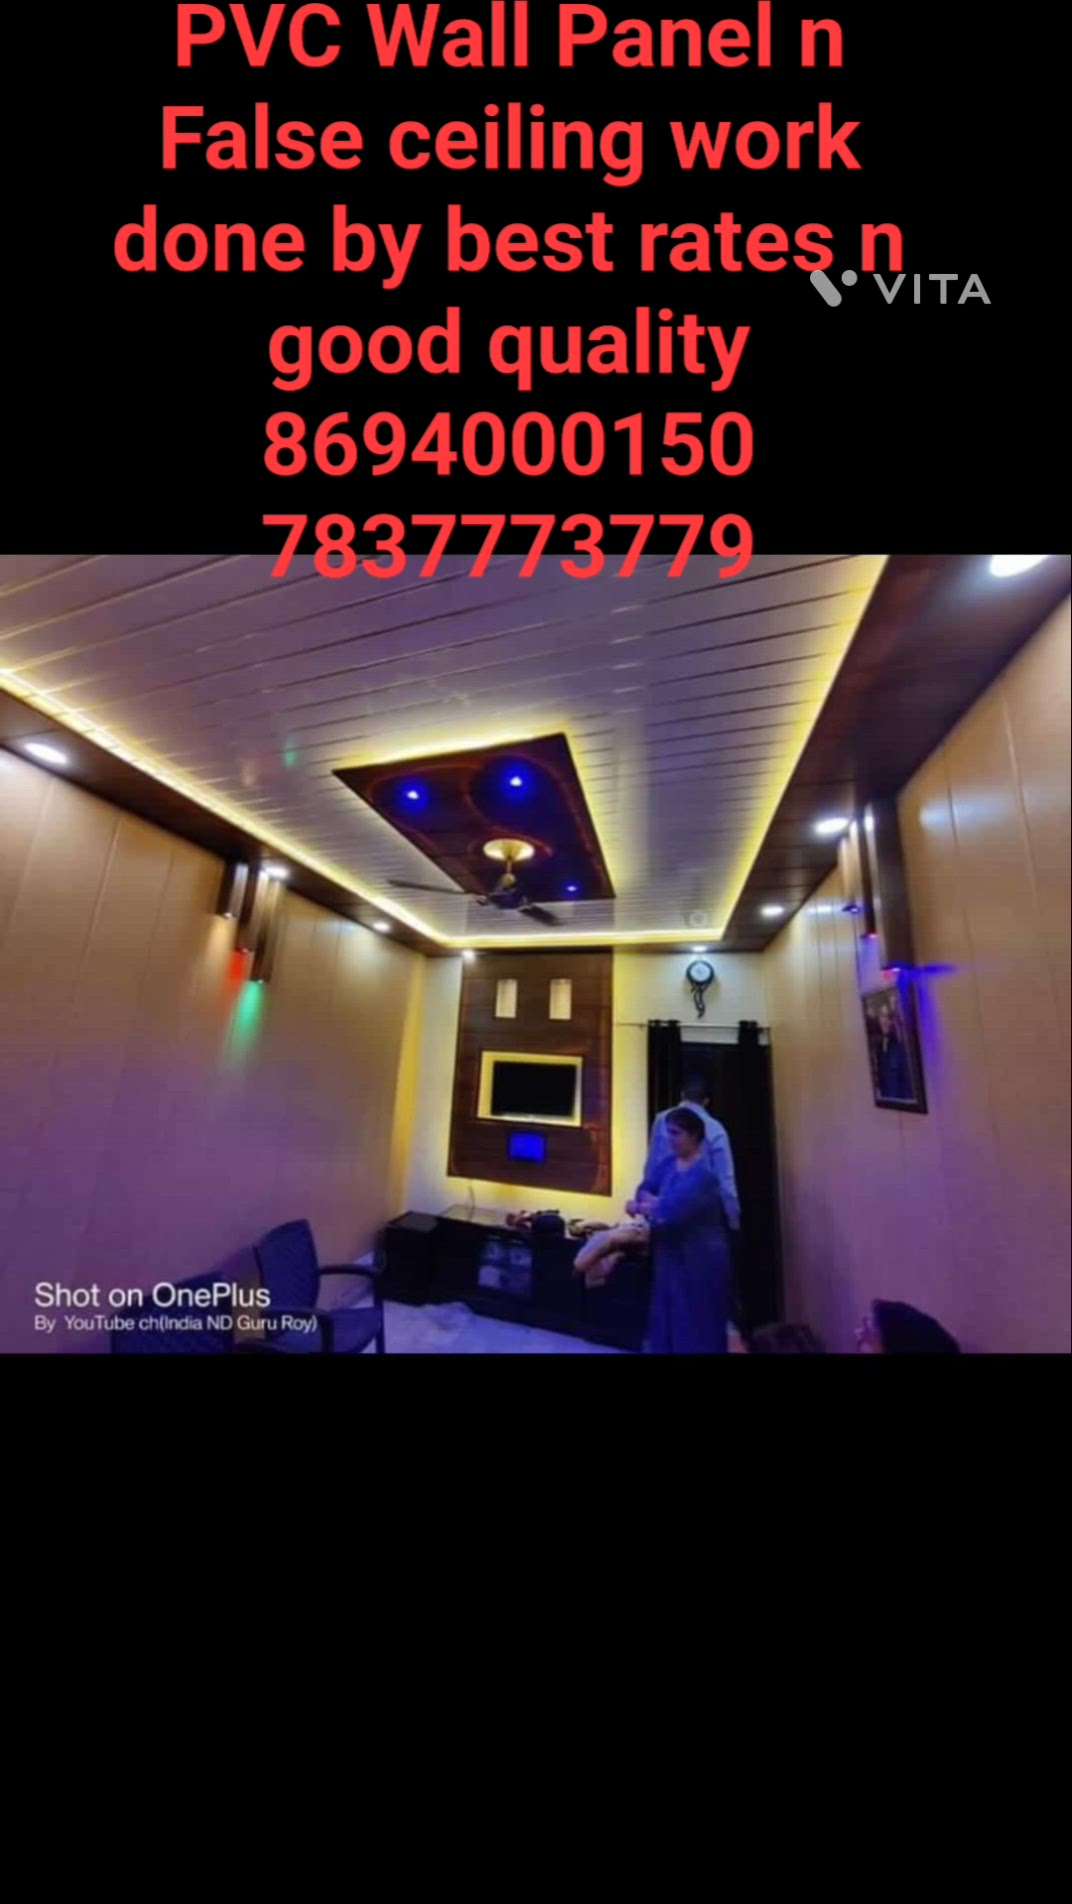 PVC FALSE CEILING WORK DONE WITH LOW PRICE AND BEST QUALITY WORK
8694000150
7837773779 # PVC FALSE CEILING  #panipat #karnal  #InteriorDesigner